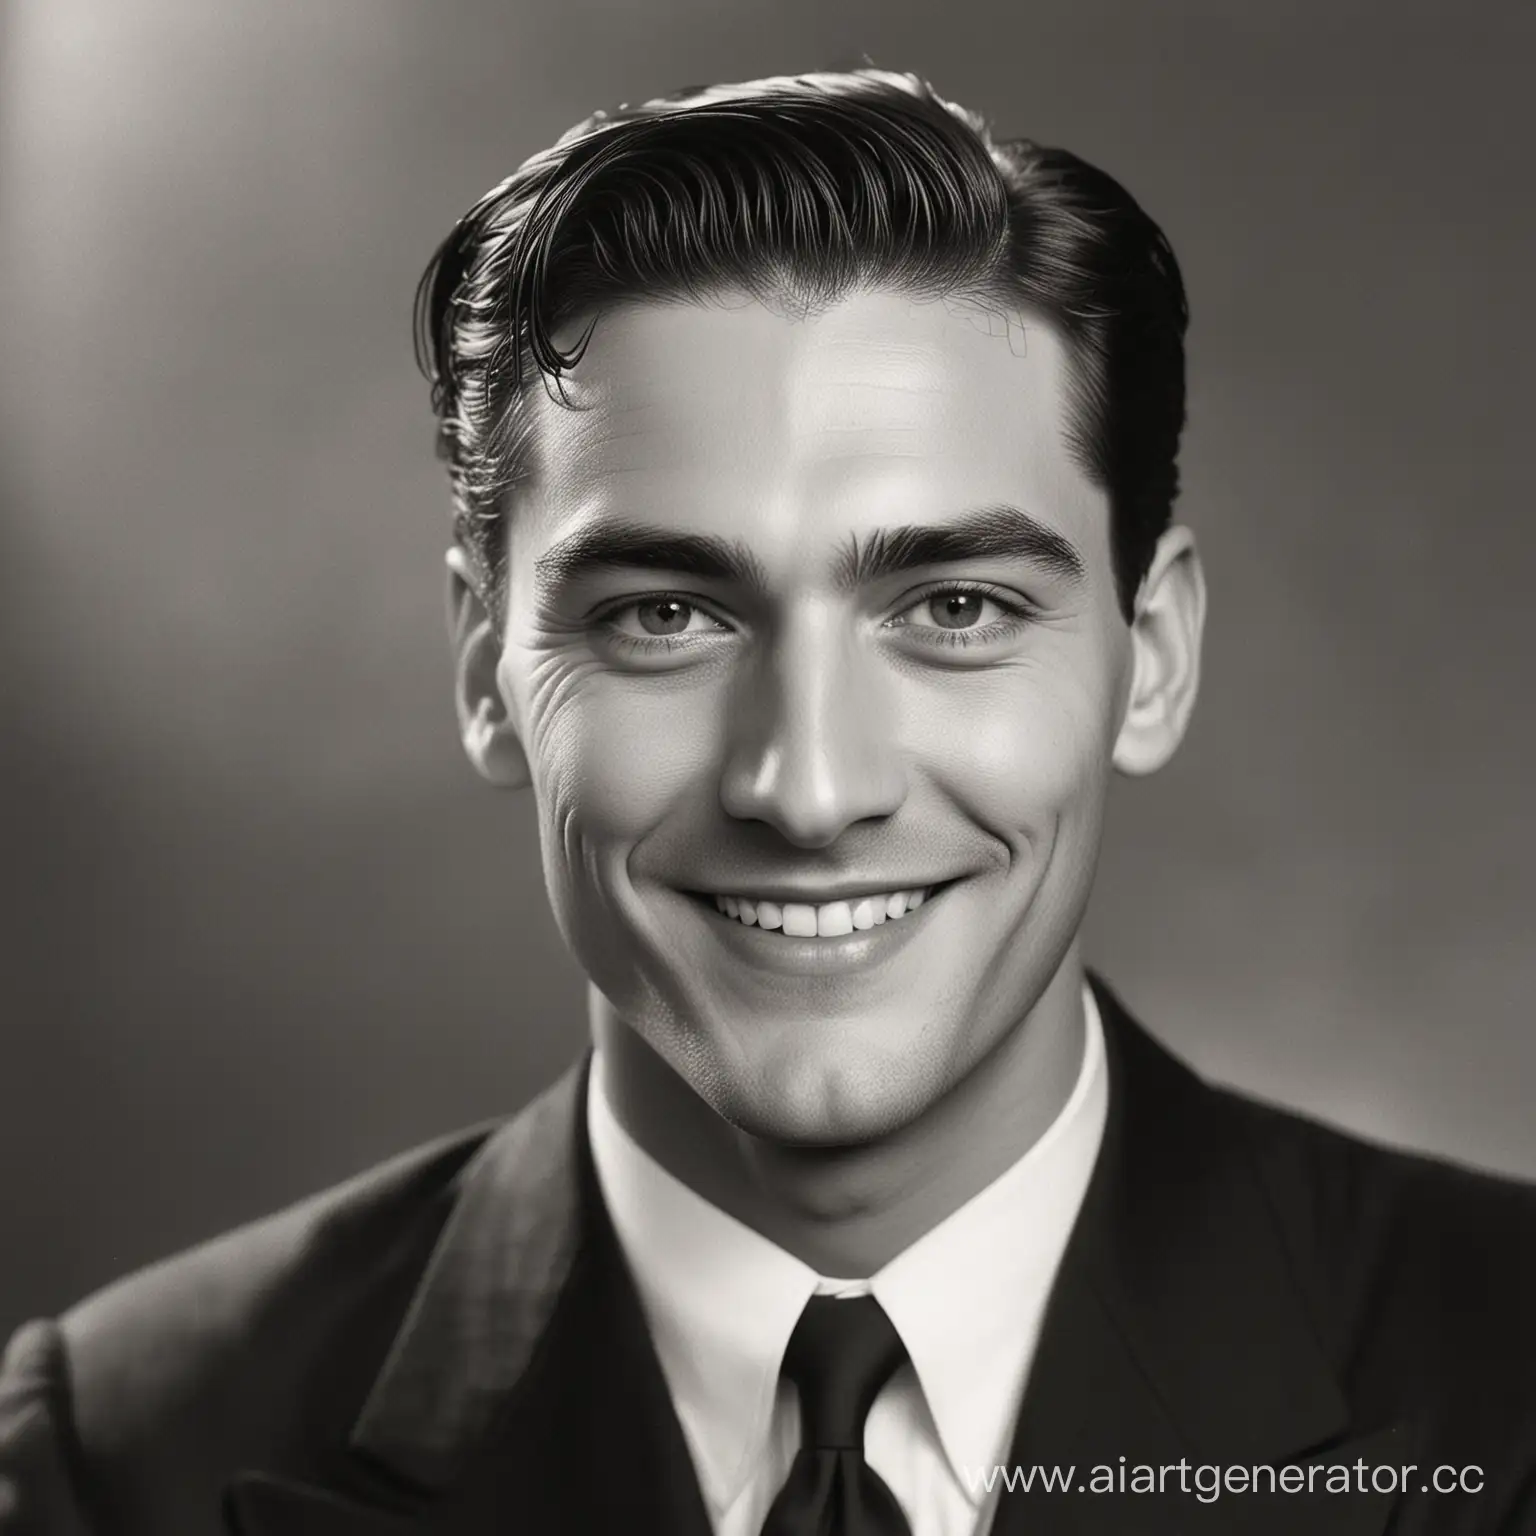 Guy with a black suit and classic hairstyle, smiling, charismatic brows. Great Depression Era. Black and White photo. 1930s.